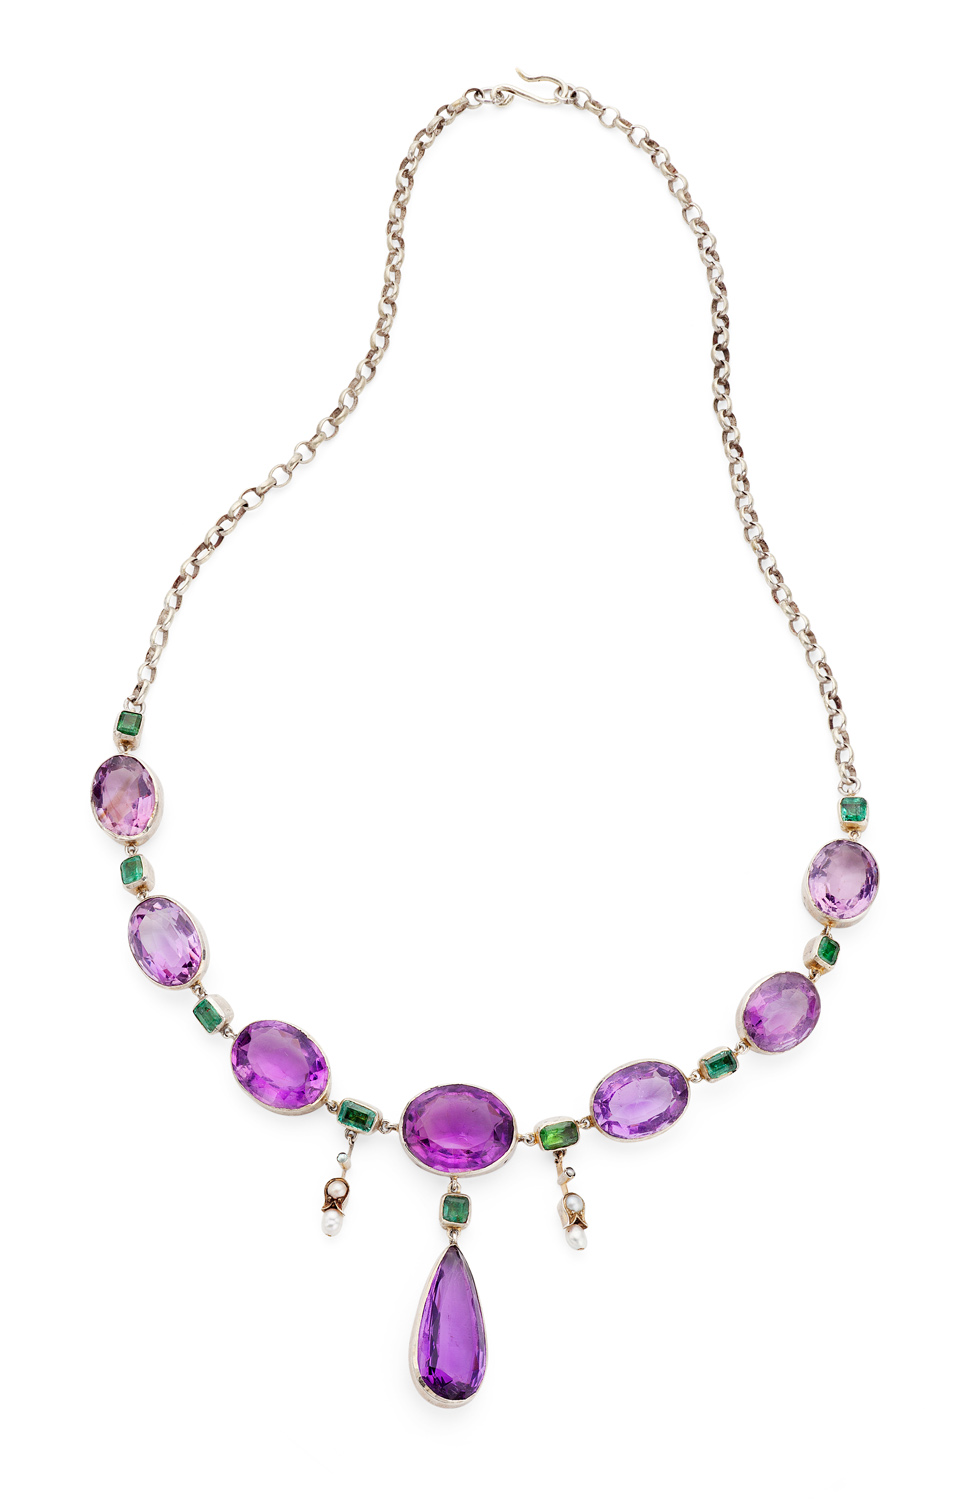 Lot 80 - An early 20th century multi-gem necklace